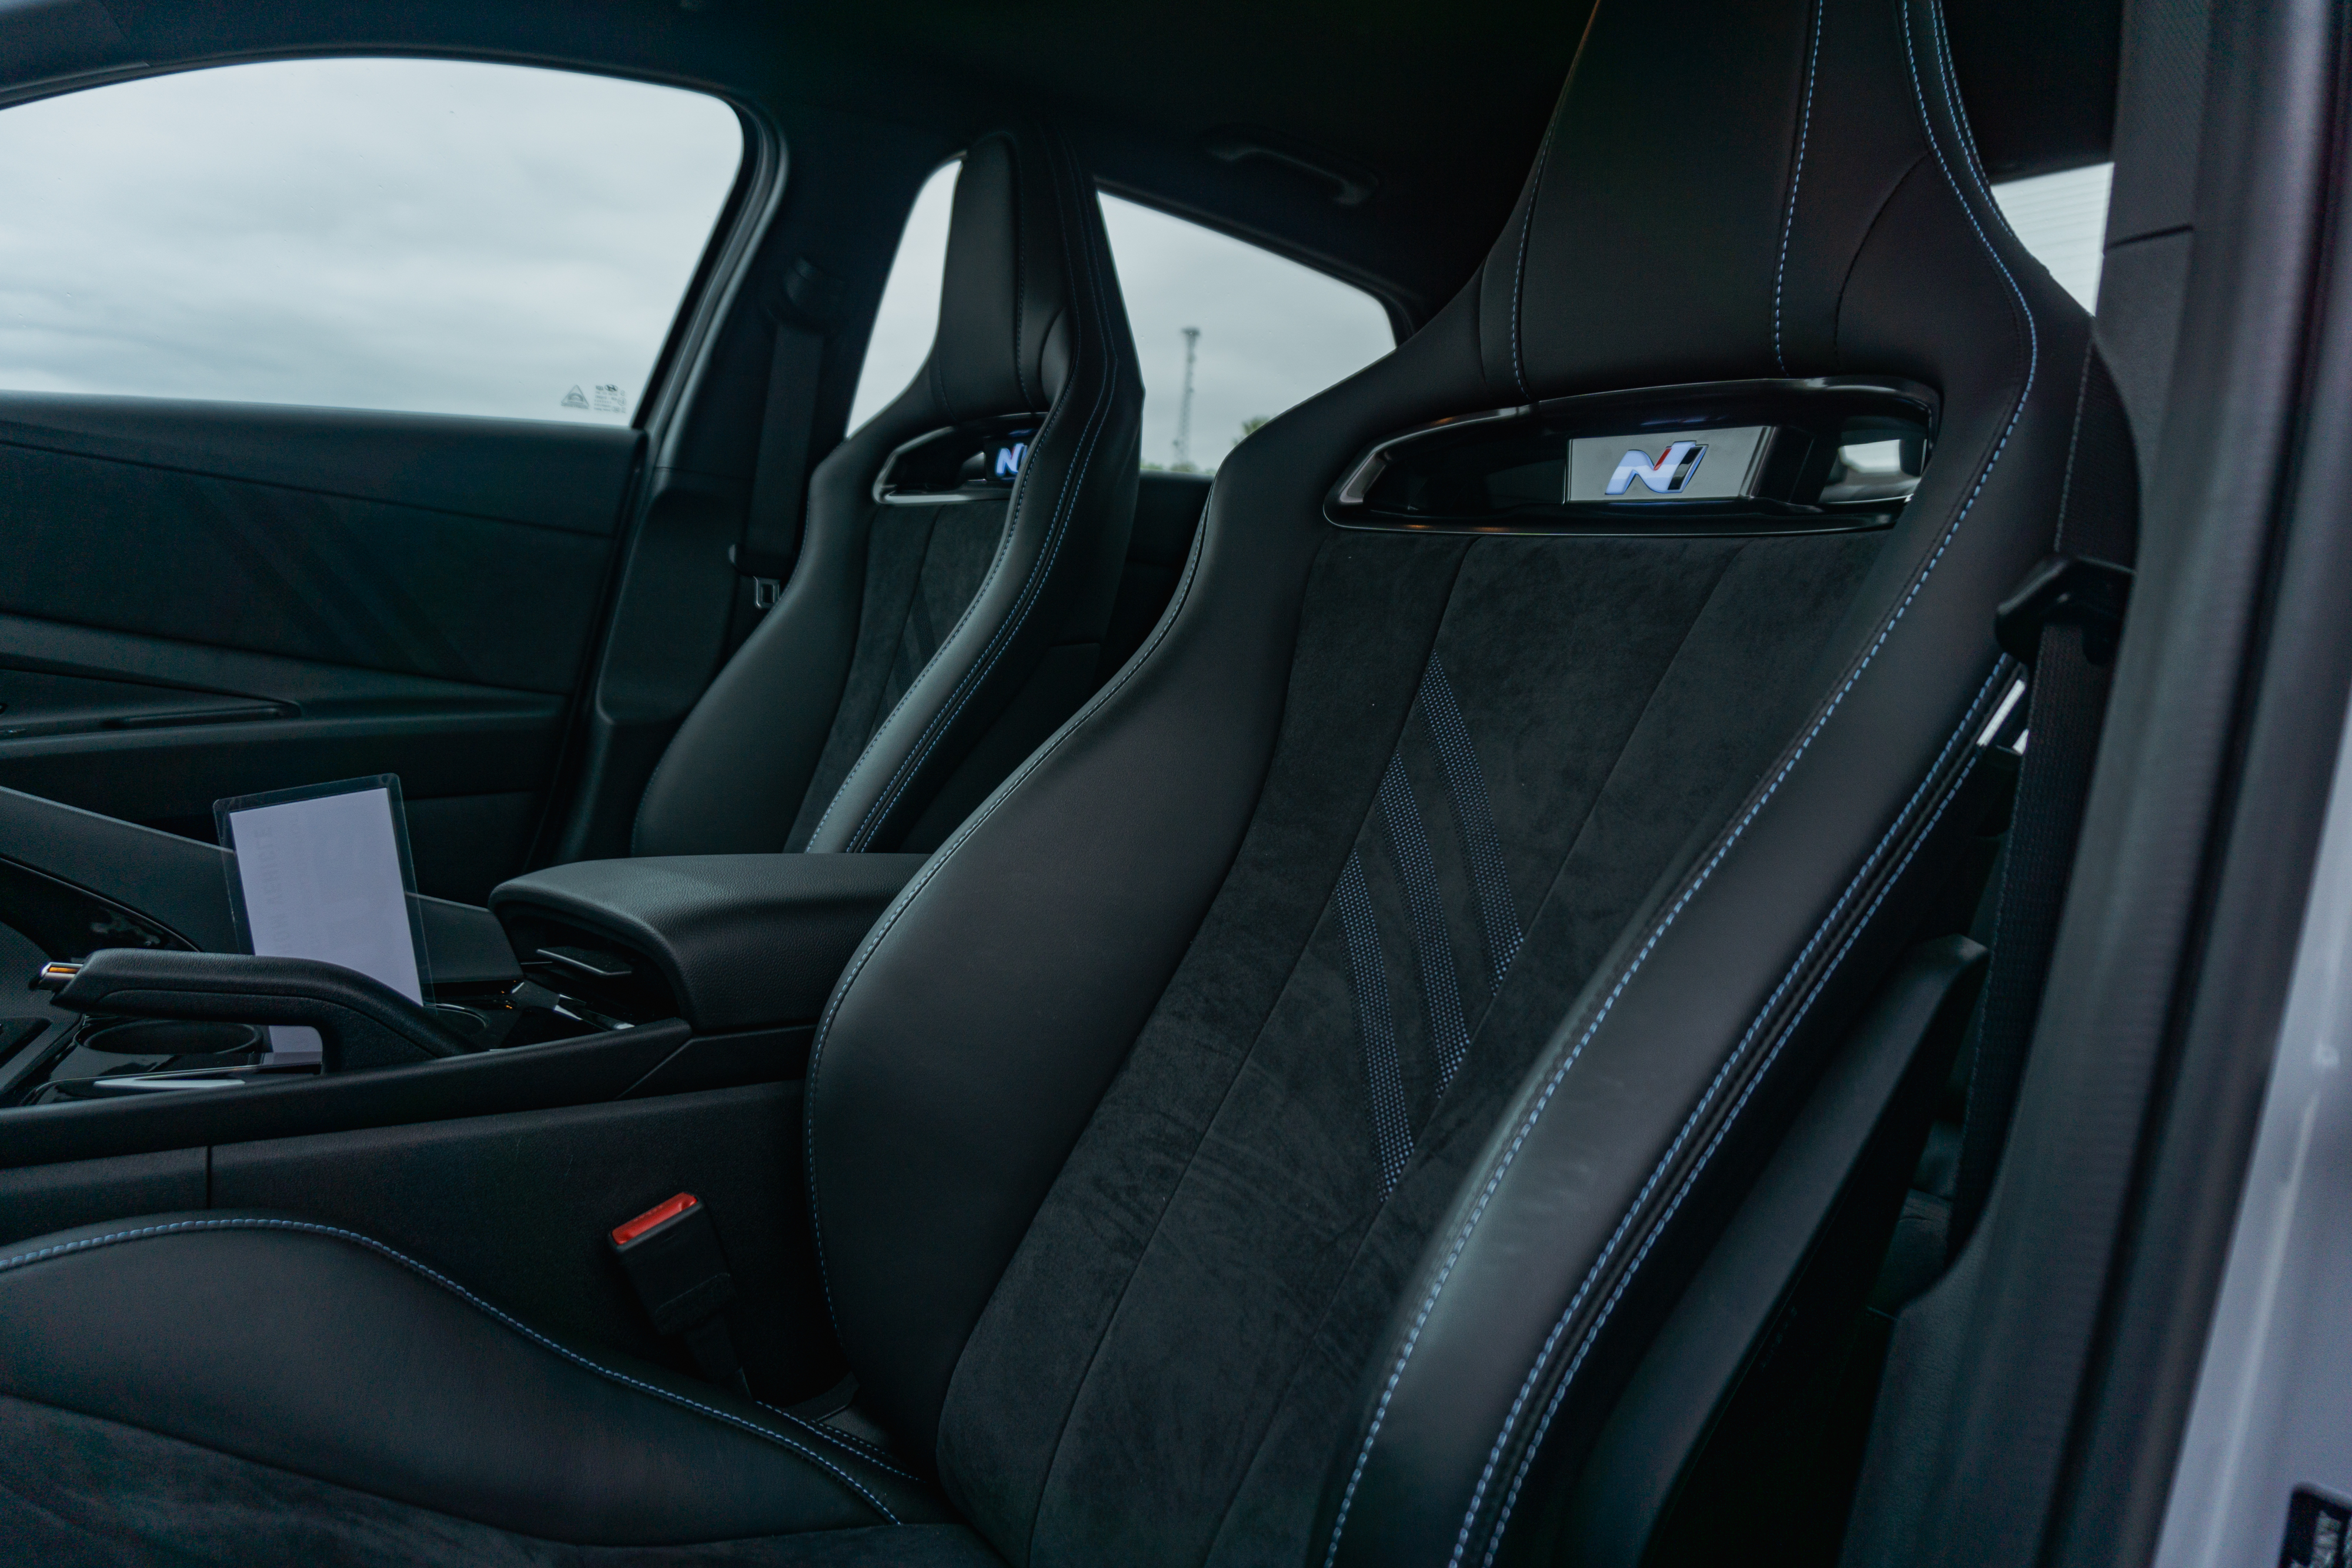 The 2022 Hyundai Elantra N DCT's black-and-blue front seats